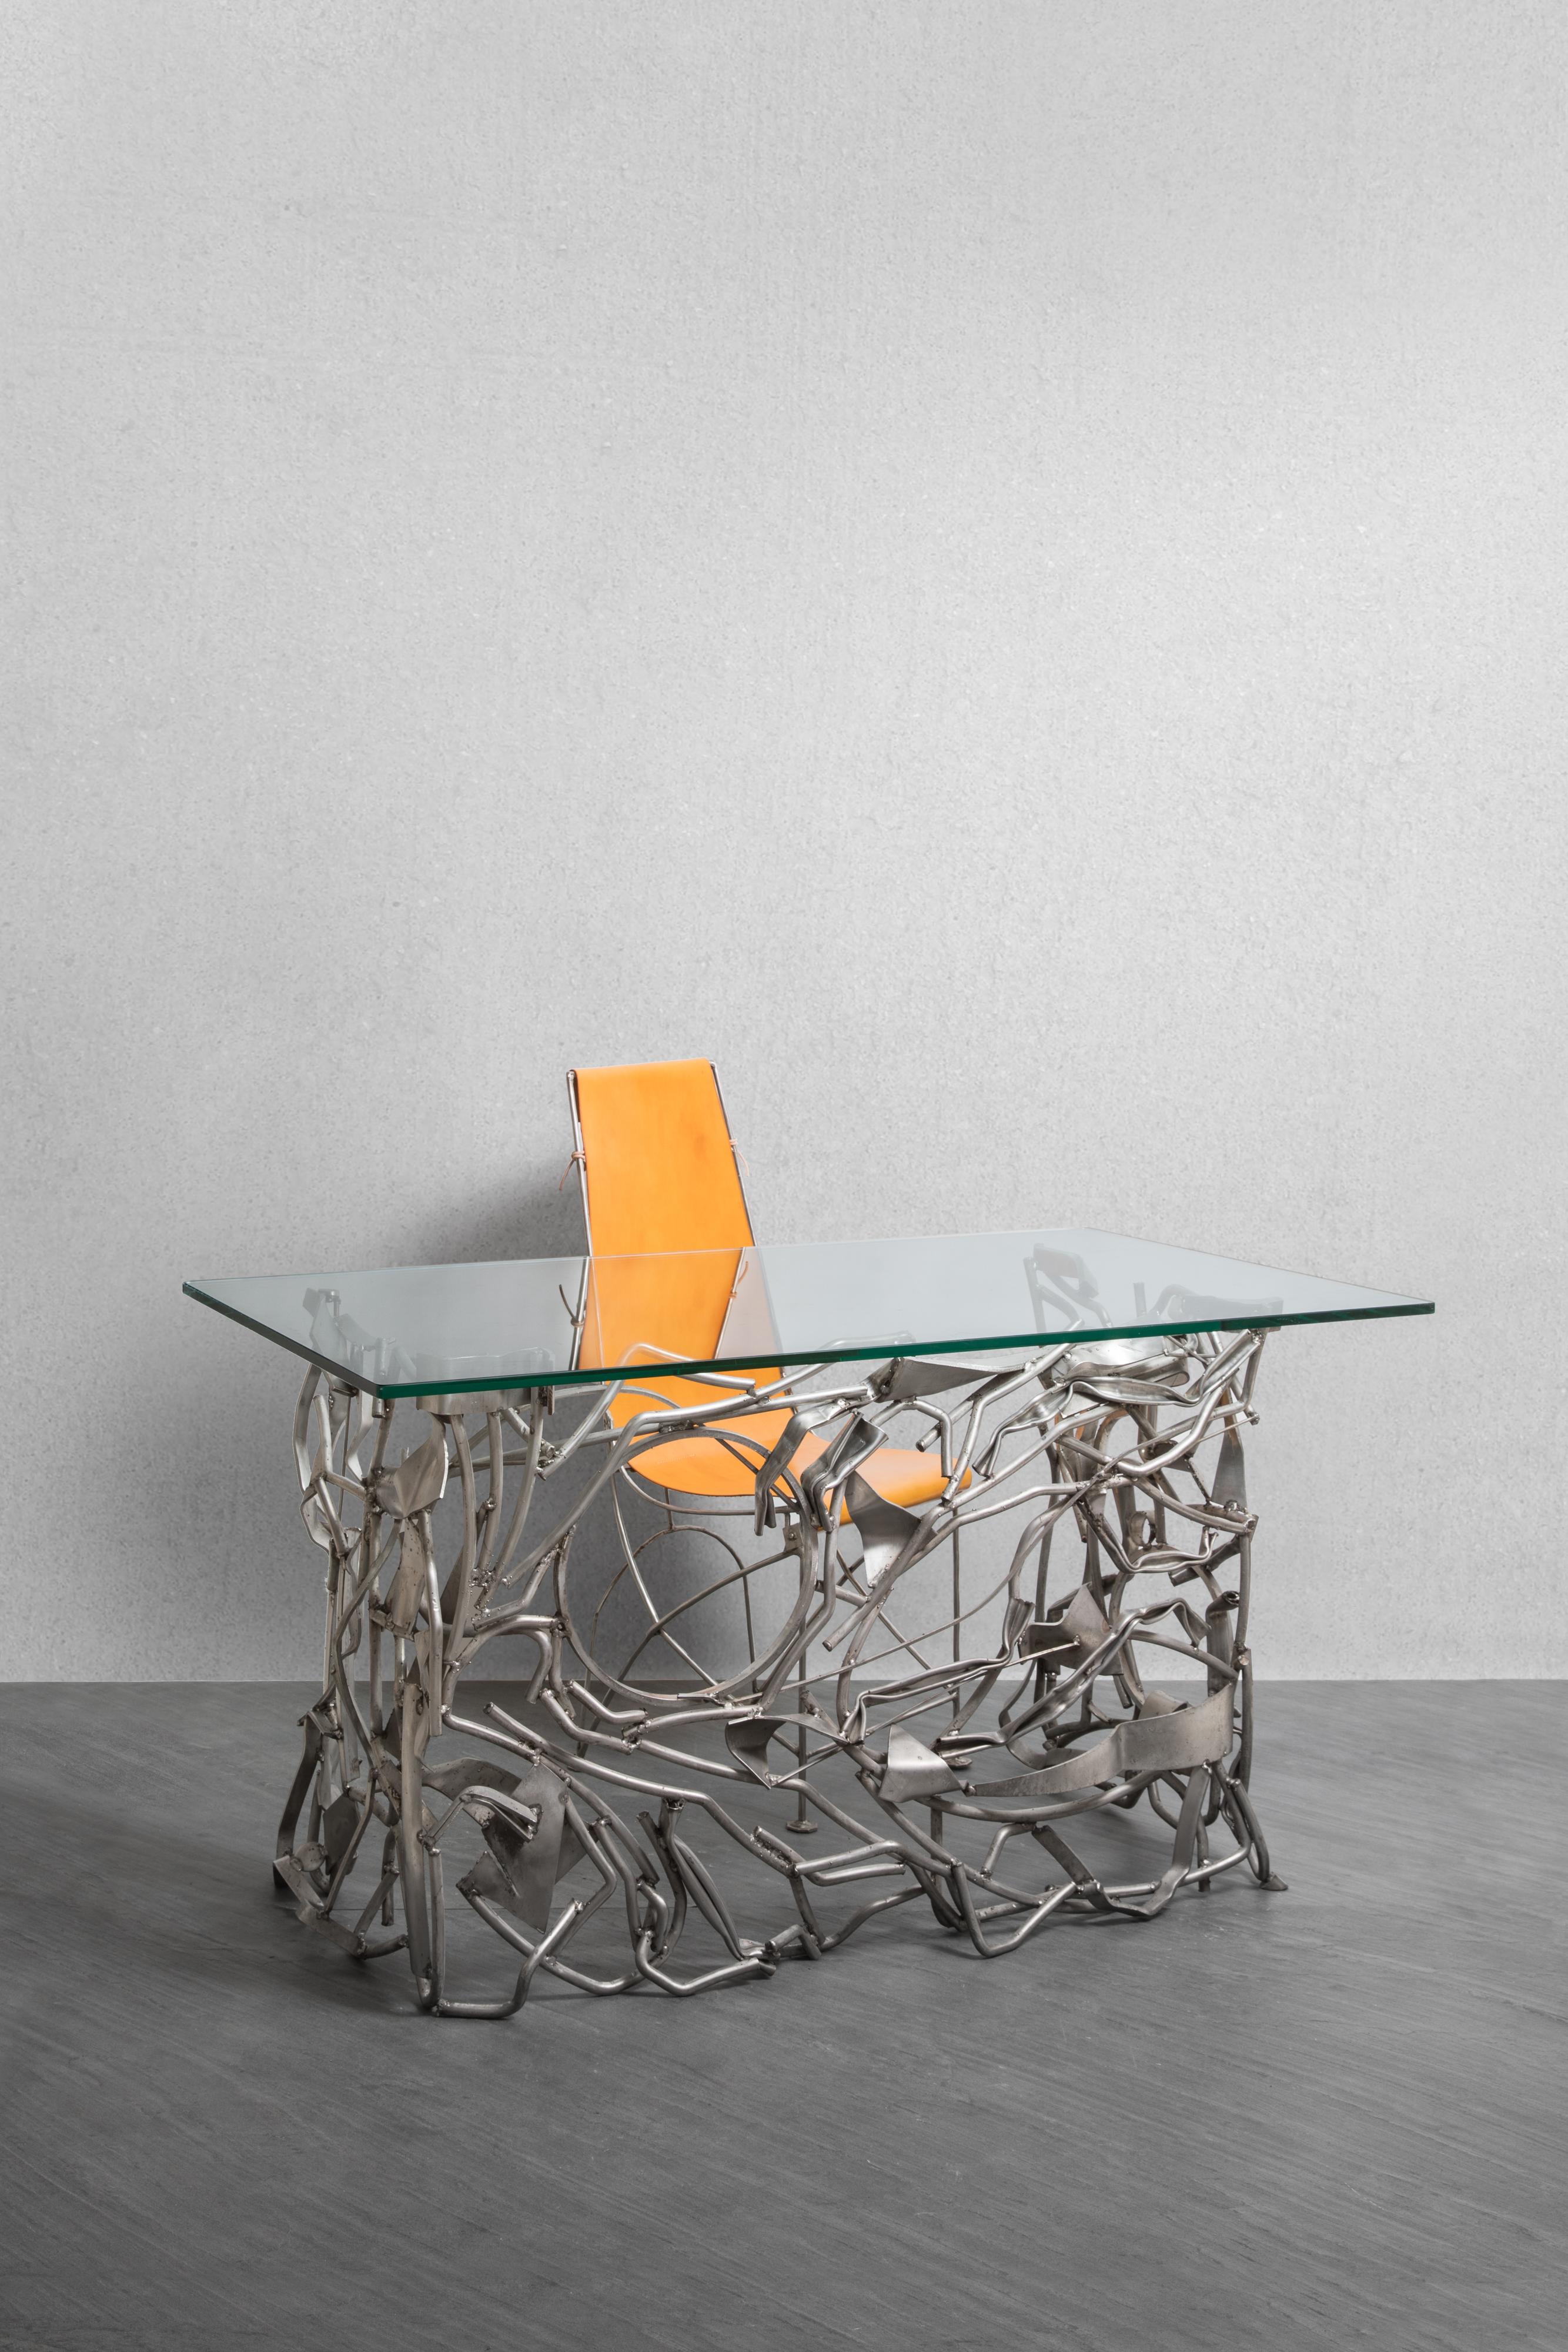 Little desk or console, composed of folded and entangled metal tubes. Rectangular glass slab.